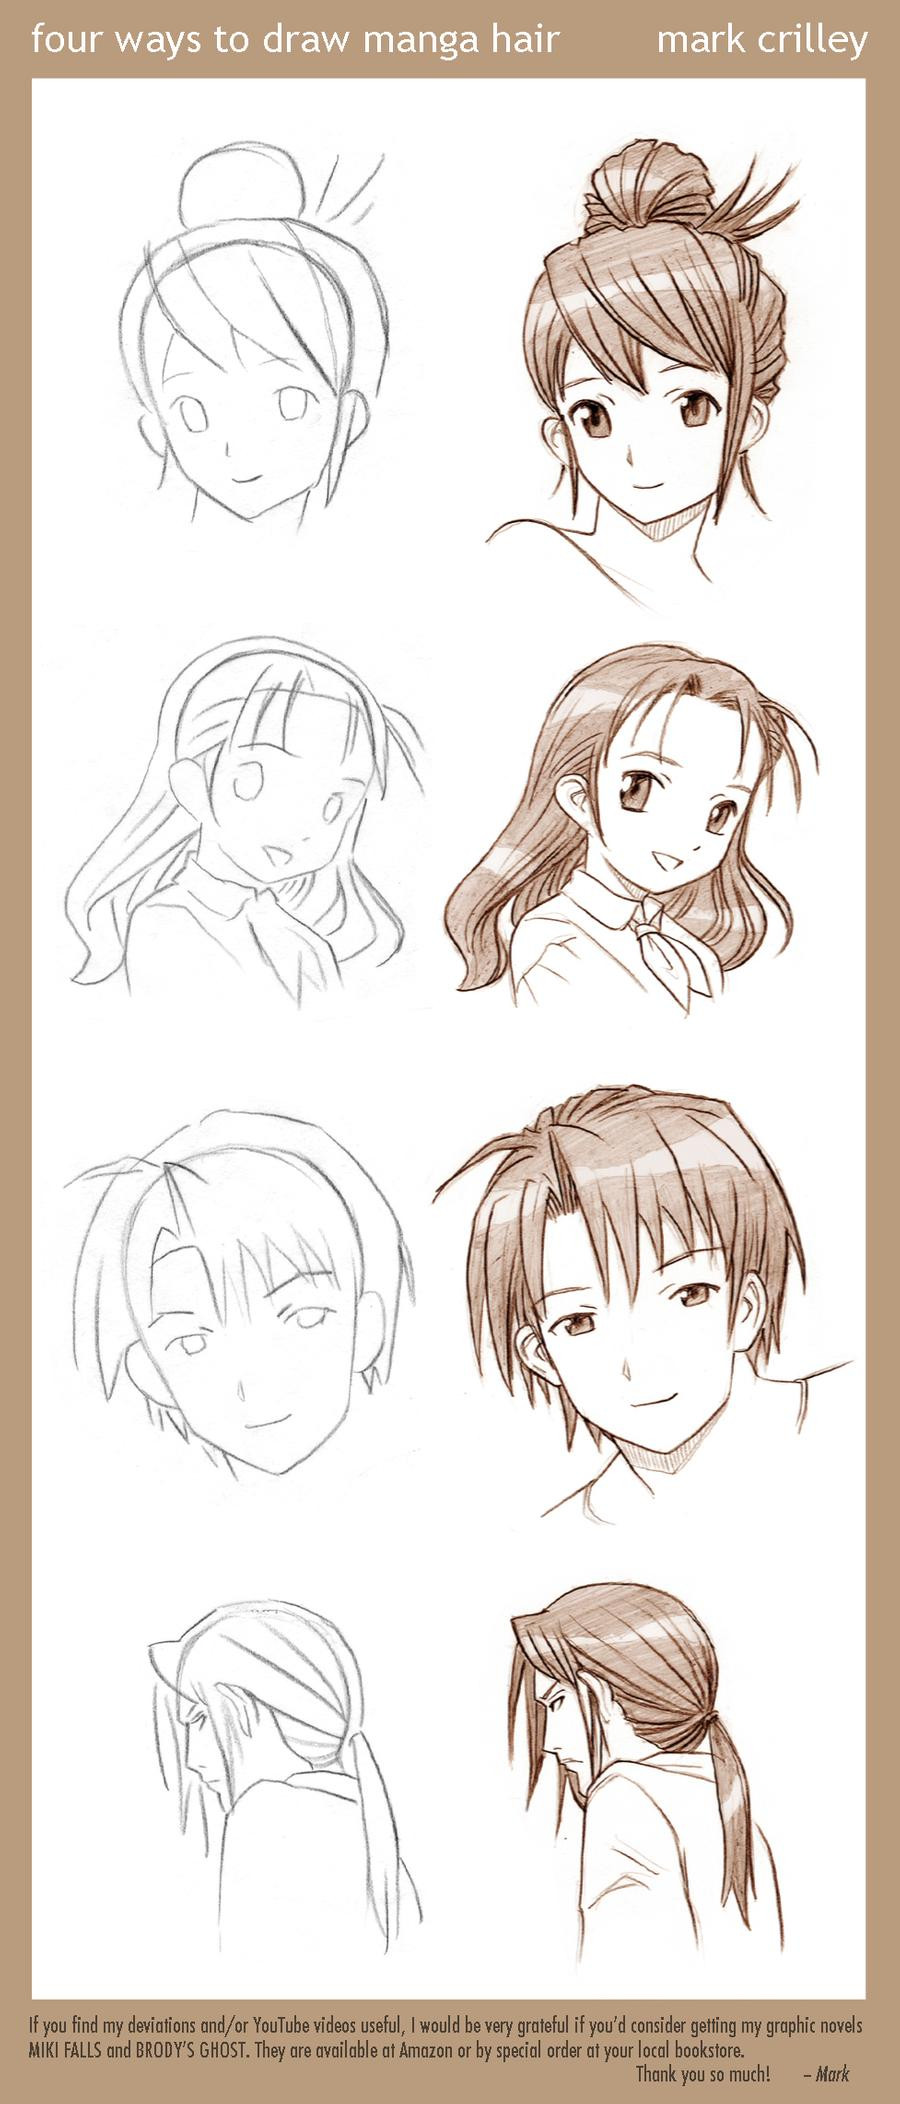 Easy Anime Hairstyles
 4 Ways to Draw Manga Hair by markcrilley on DeviantArt